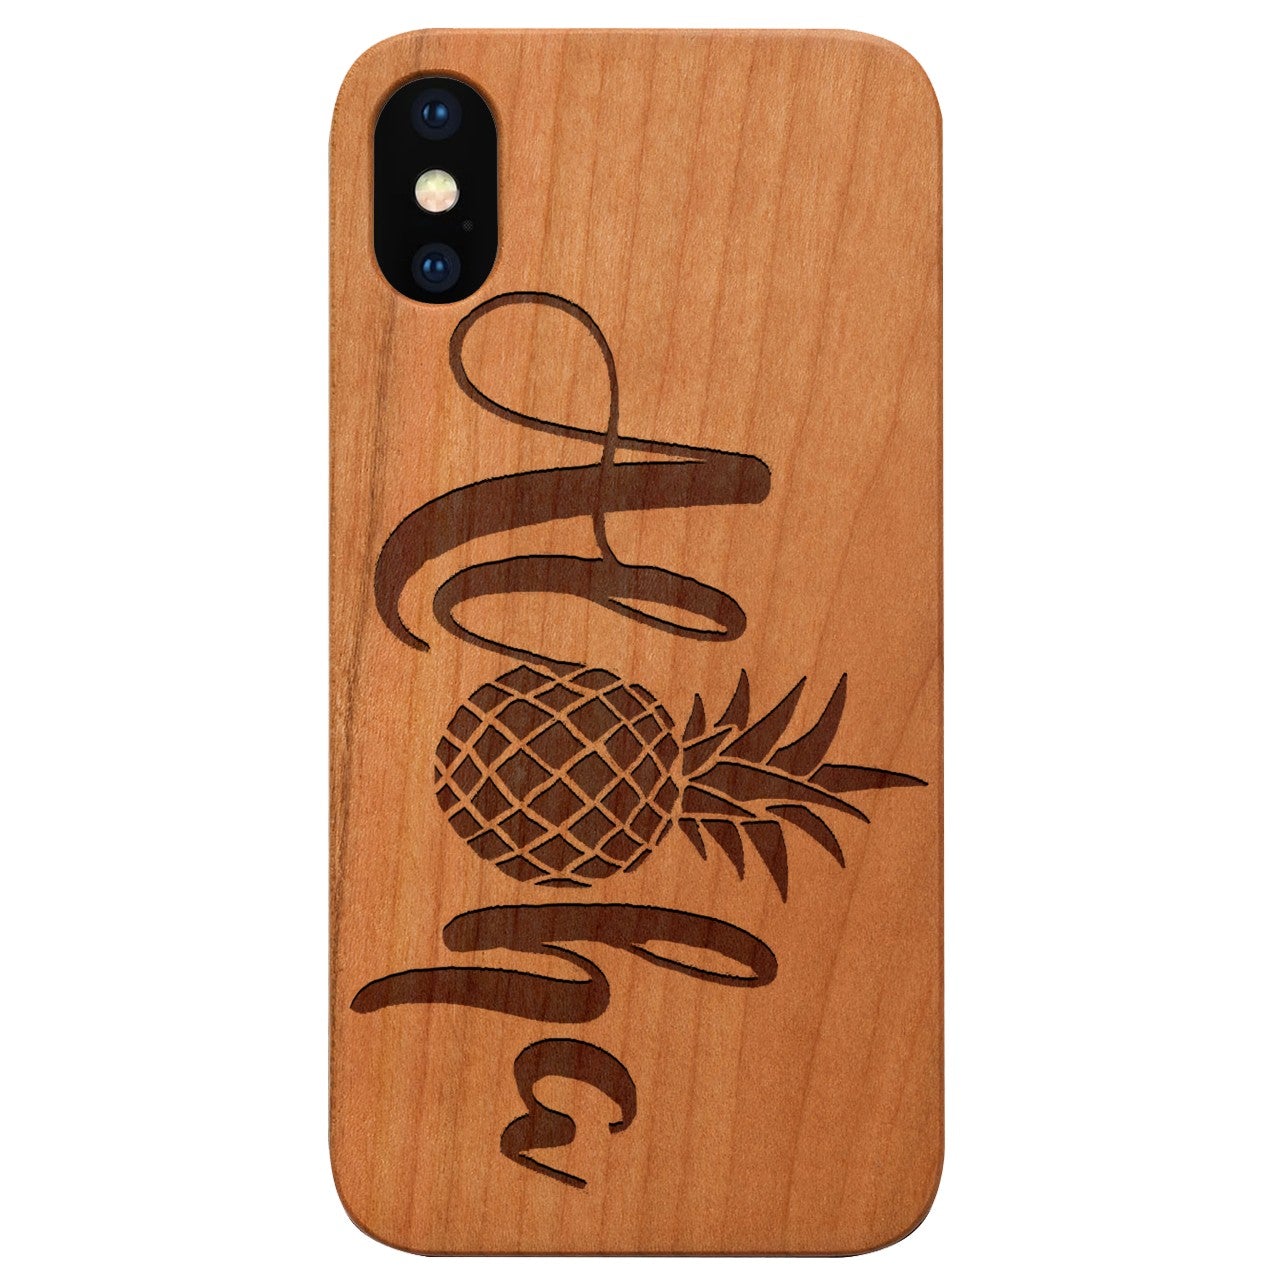  Aloha Pineapple - Engraved - Wooden Phone Case - IPhone 13 Models